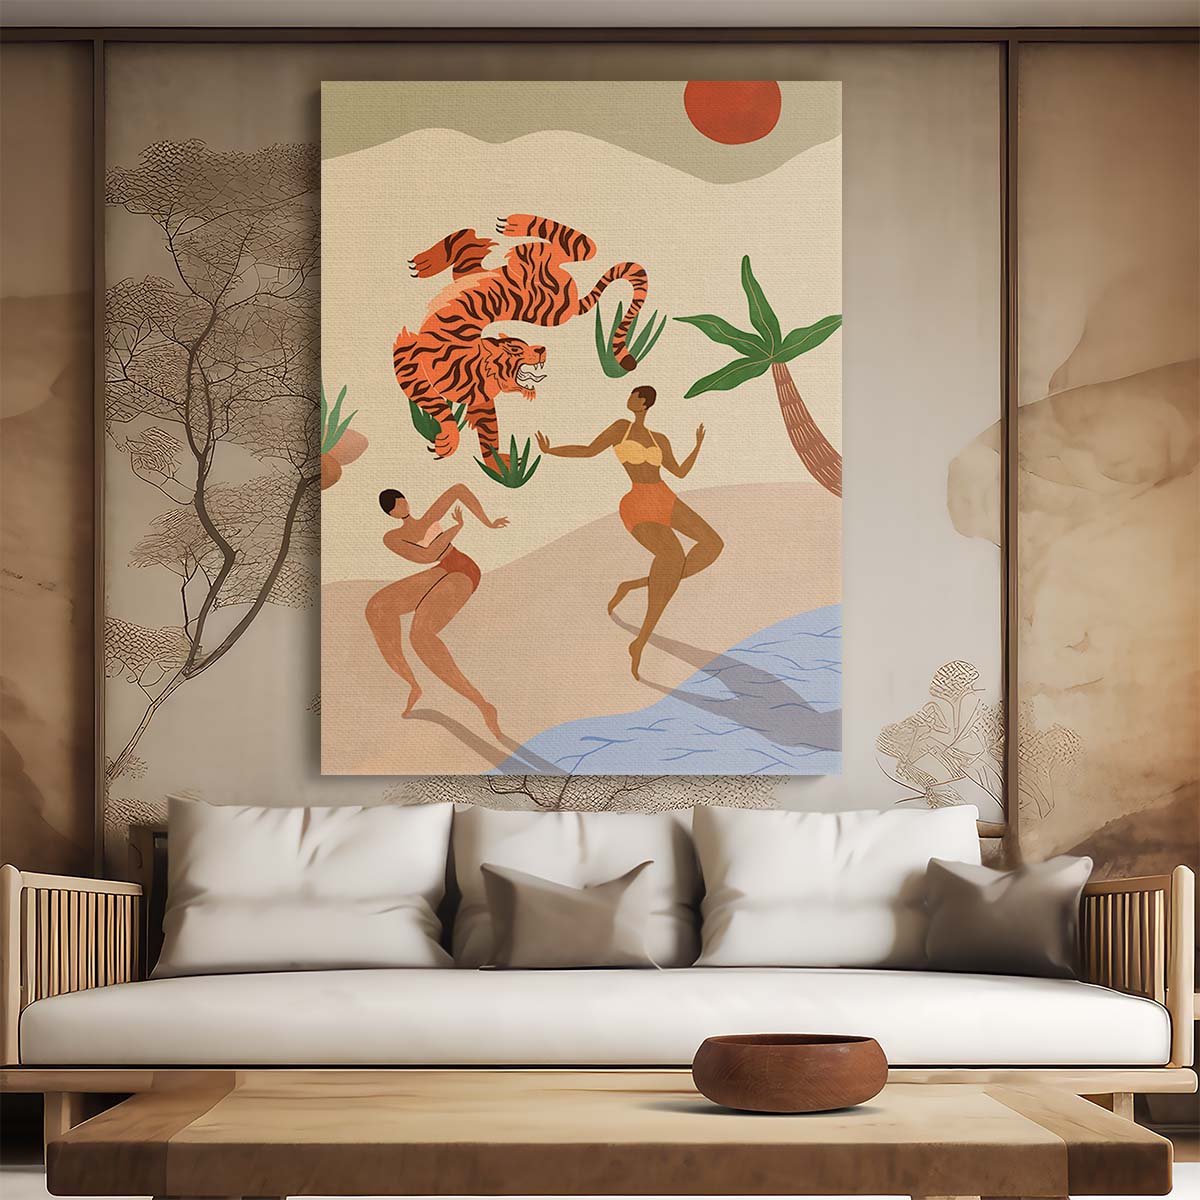 Exotic Beach Dance with Tigers Figurative Illustration Art by Luxuriance Designs, made in USA